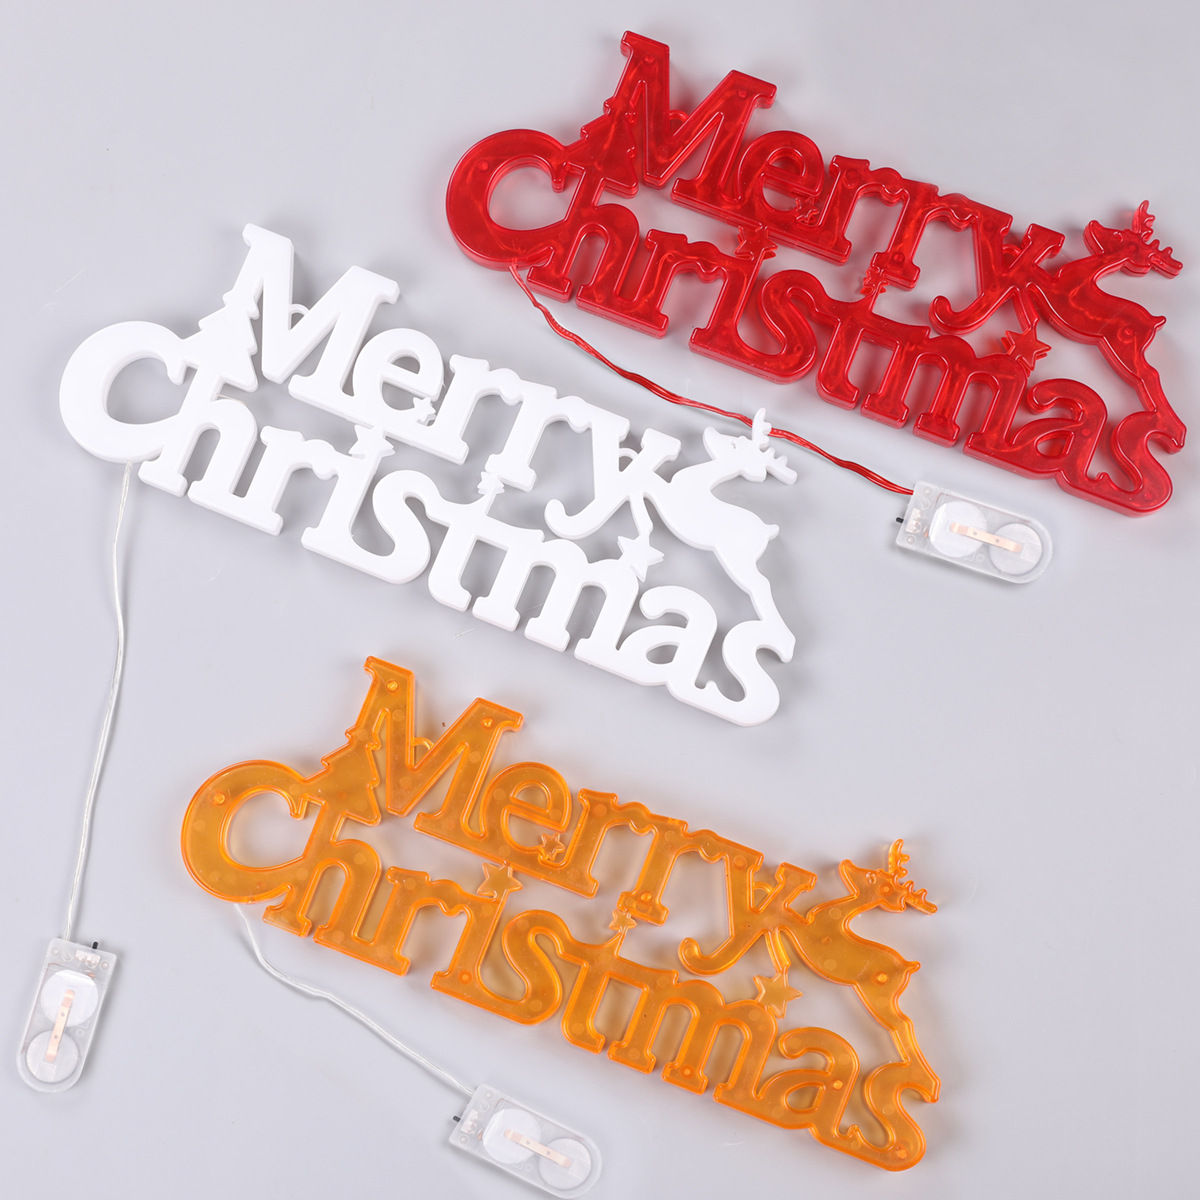 Merry-Christmas-Neon-Night-Light-Hanging-Tree-Decoration-Lights-Letter-Modeling-Lights-Outdoor-Lamp--1918231-5